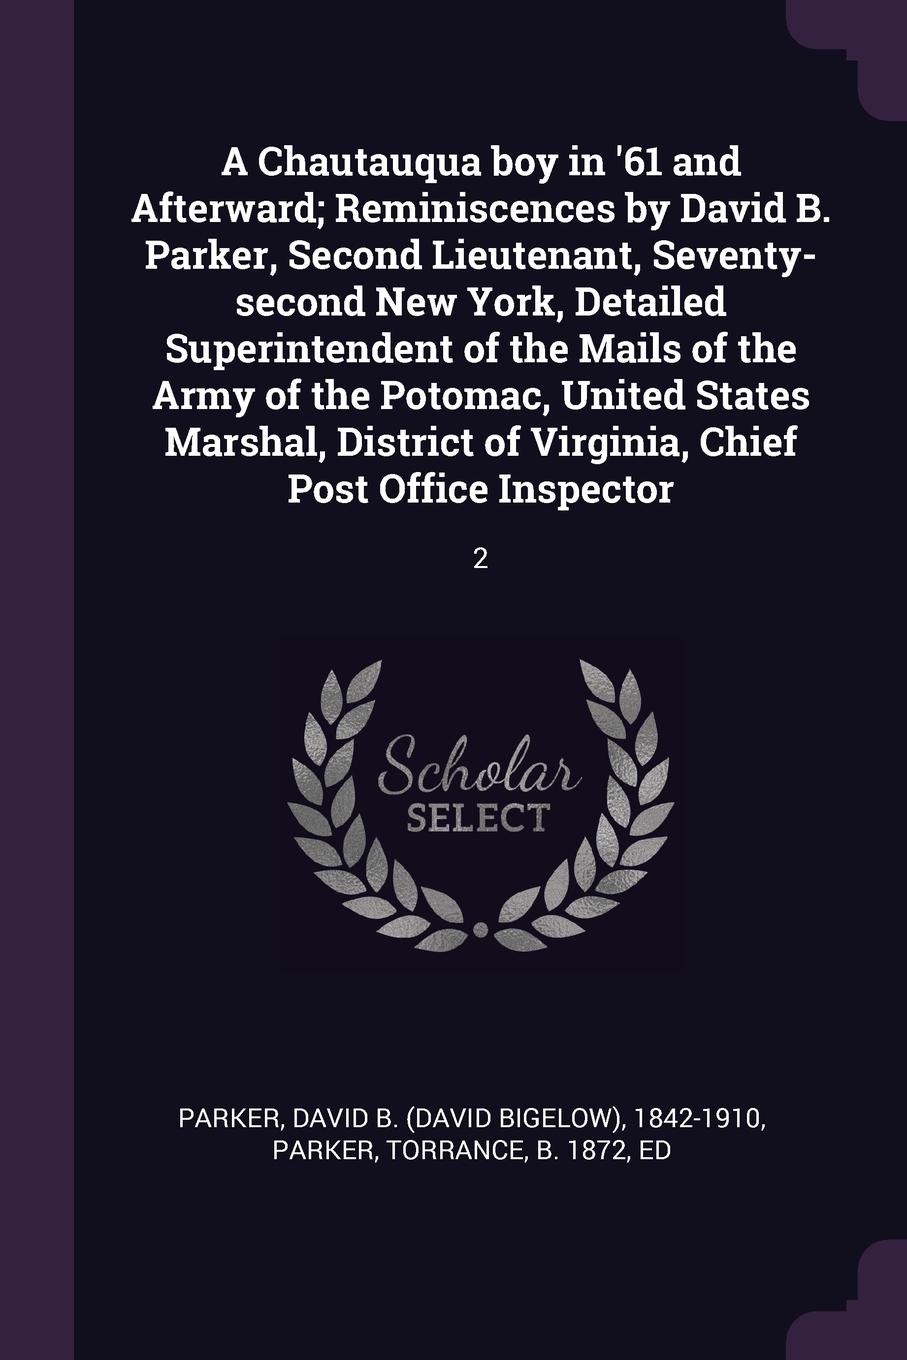 A Chautauqua boy in `61 and Afterward; Reminiscences by David B. Parker, Second Lieutenant, Seventy-second New York, Detailed Superintendent of the Mails of the Army of the Potomac, United States Marshal, District of Virginia, Chief Post Office In...